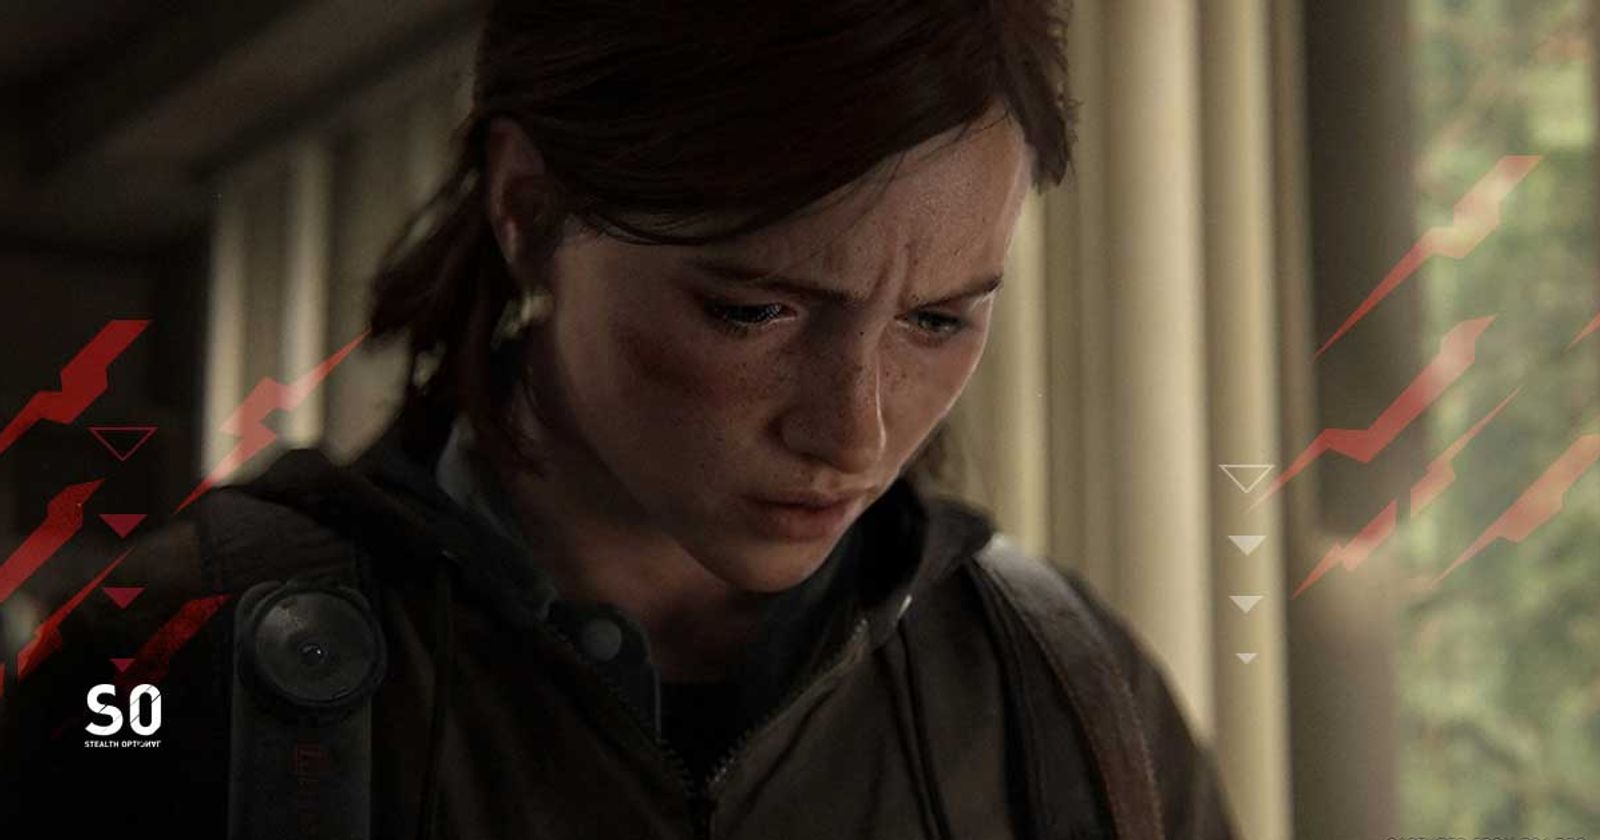 The Ending is Not Out There- The Last of Us Part 2 Director